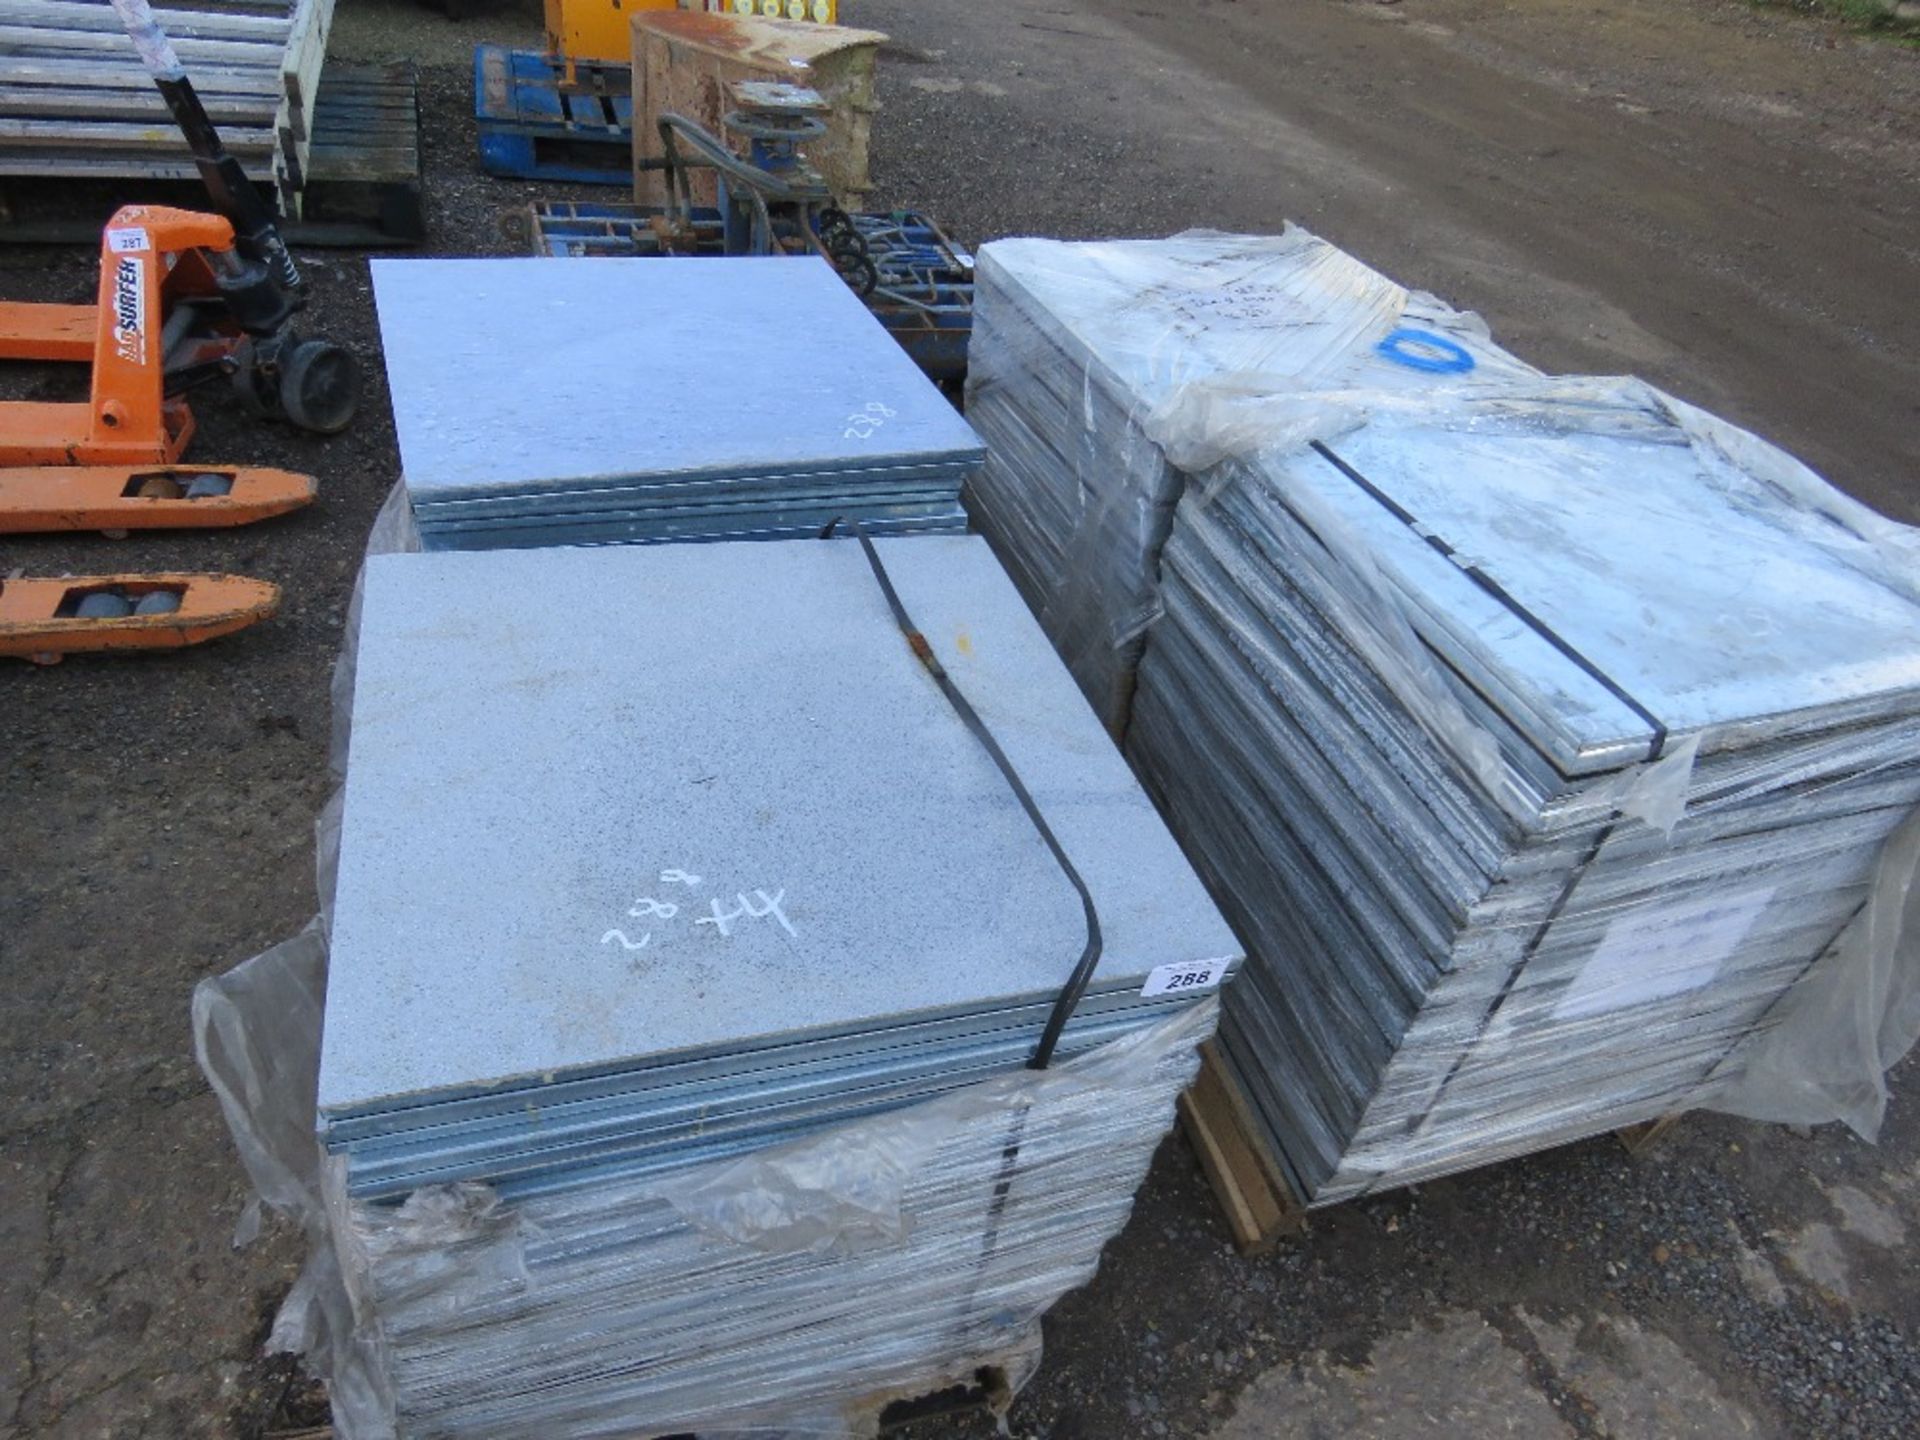 4 X PALLETS OF ASSORTED TEMPORARY HD EXHIBITION FLOORING TILES, IDEAL FOR GARAGE FLOOR ETC.